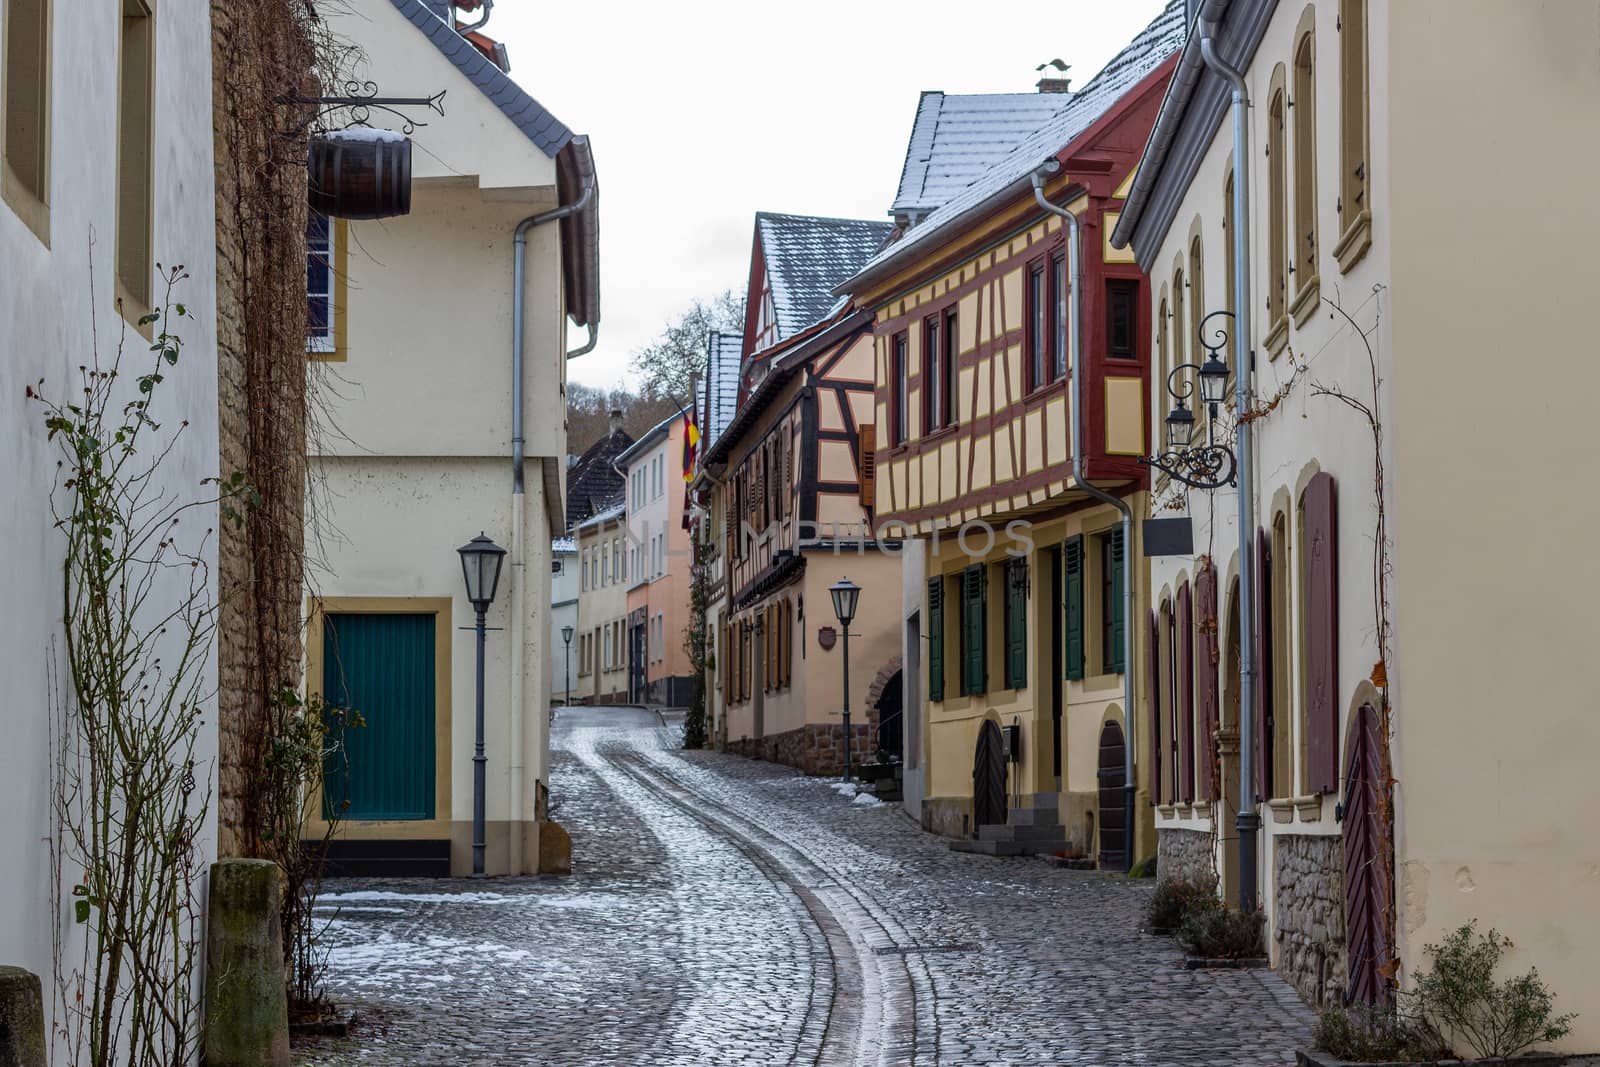 Cobbled alley with half-timbered houses in Meisenheim by reinerc